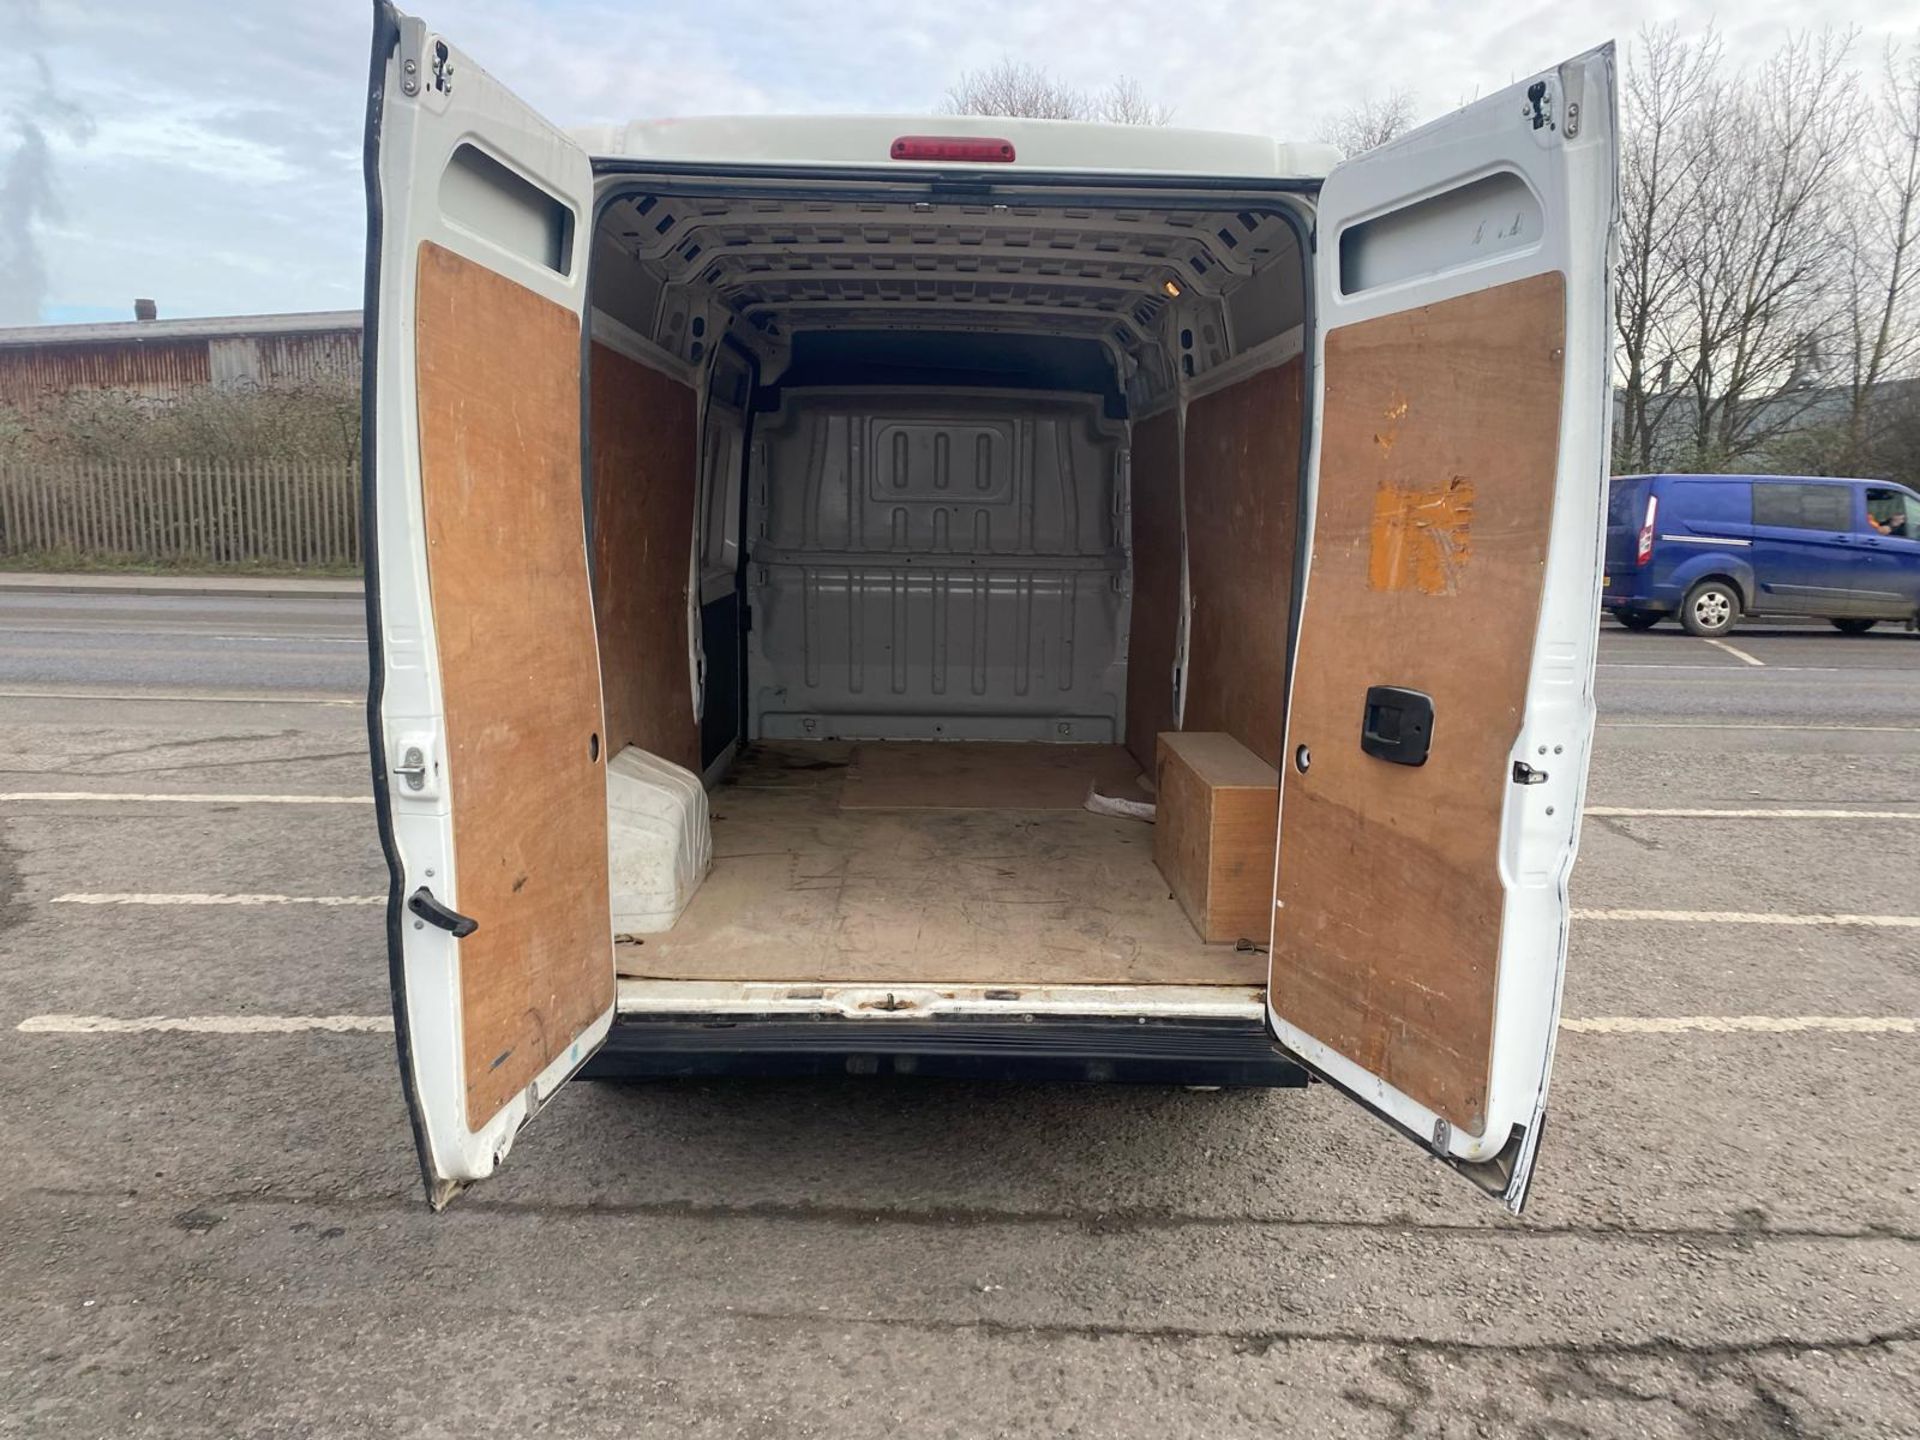 2019 69 PEUGEOT BOXER PANEL VAN - 57K MILES - EURO 6 - PLY LINED. - Image 10 of 12